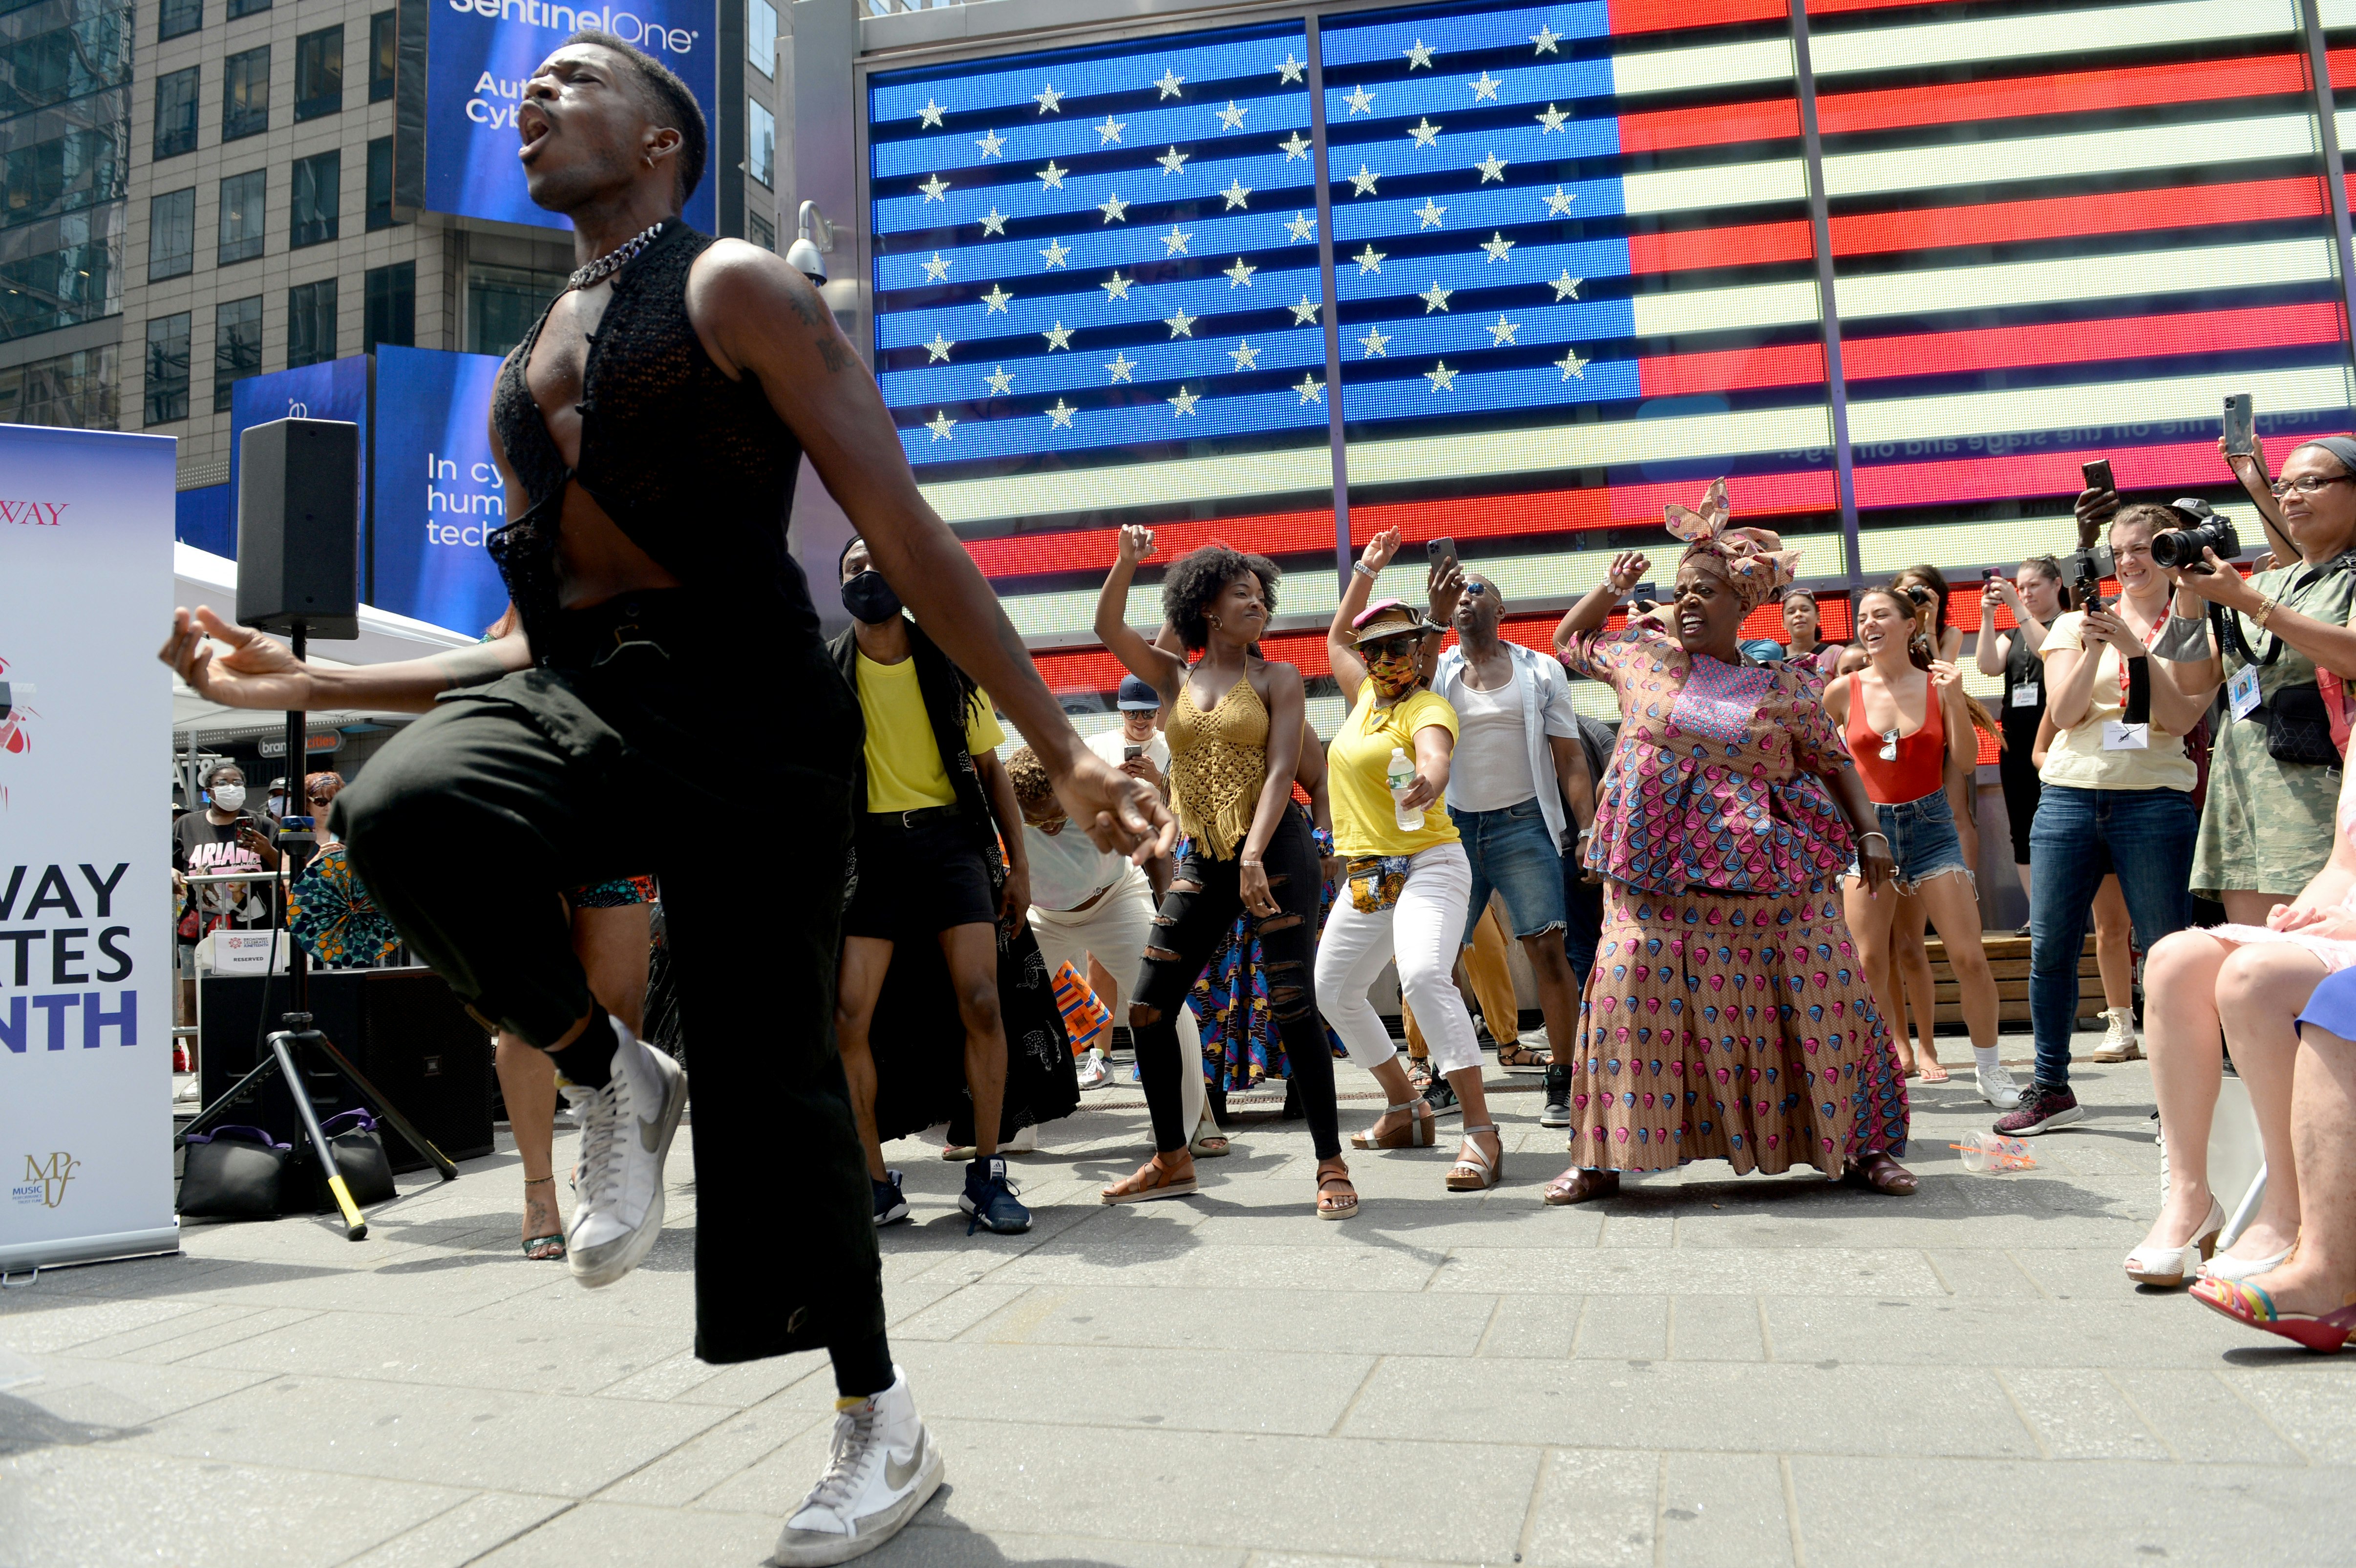 Broadway performers celebrate Juneteenth in Times Square, New York, New York, USA